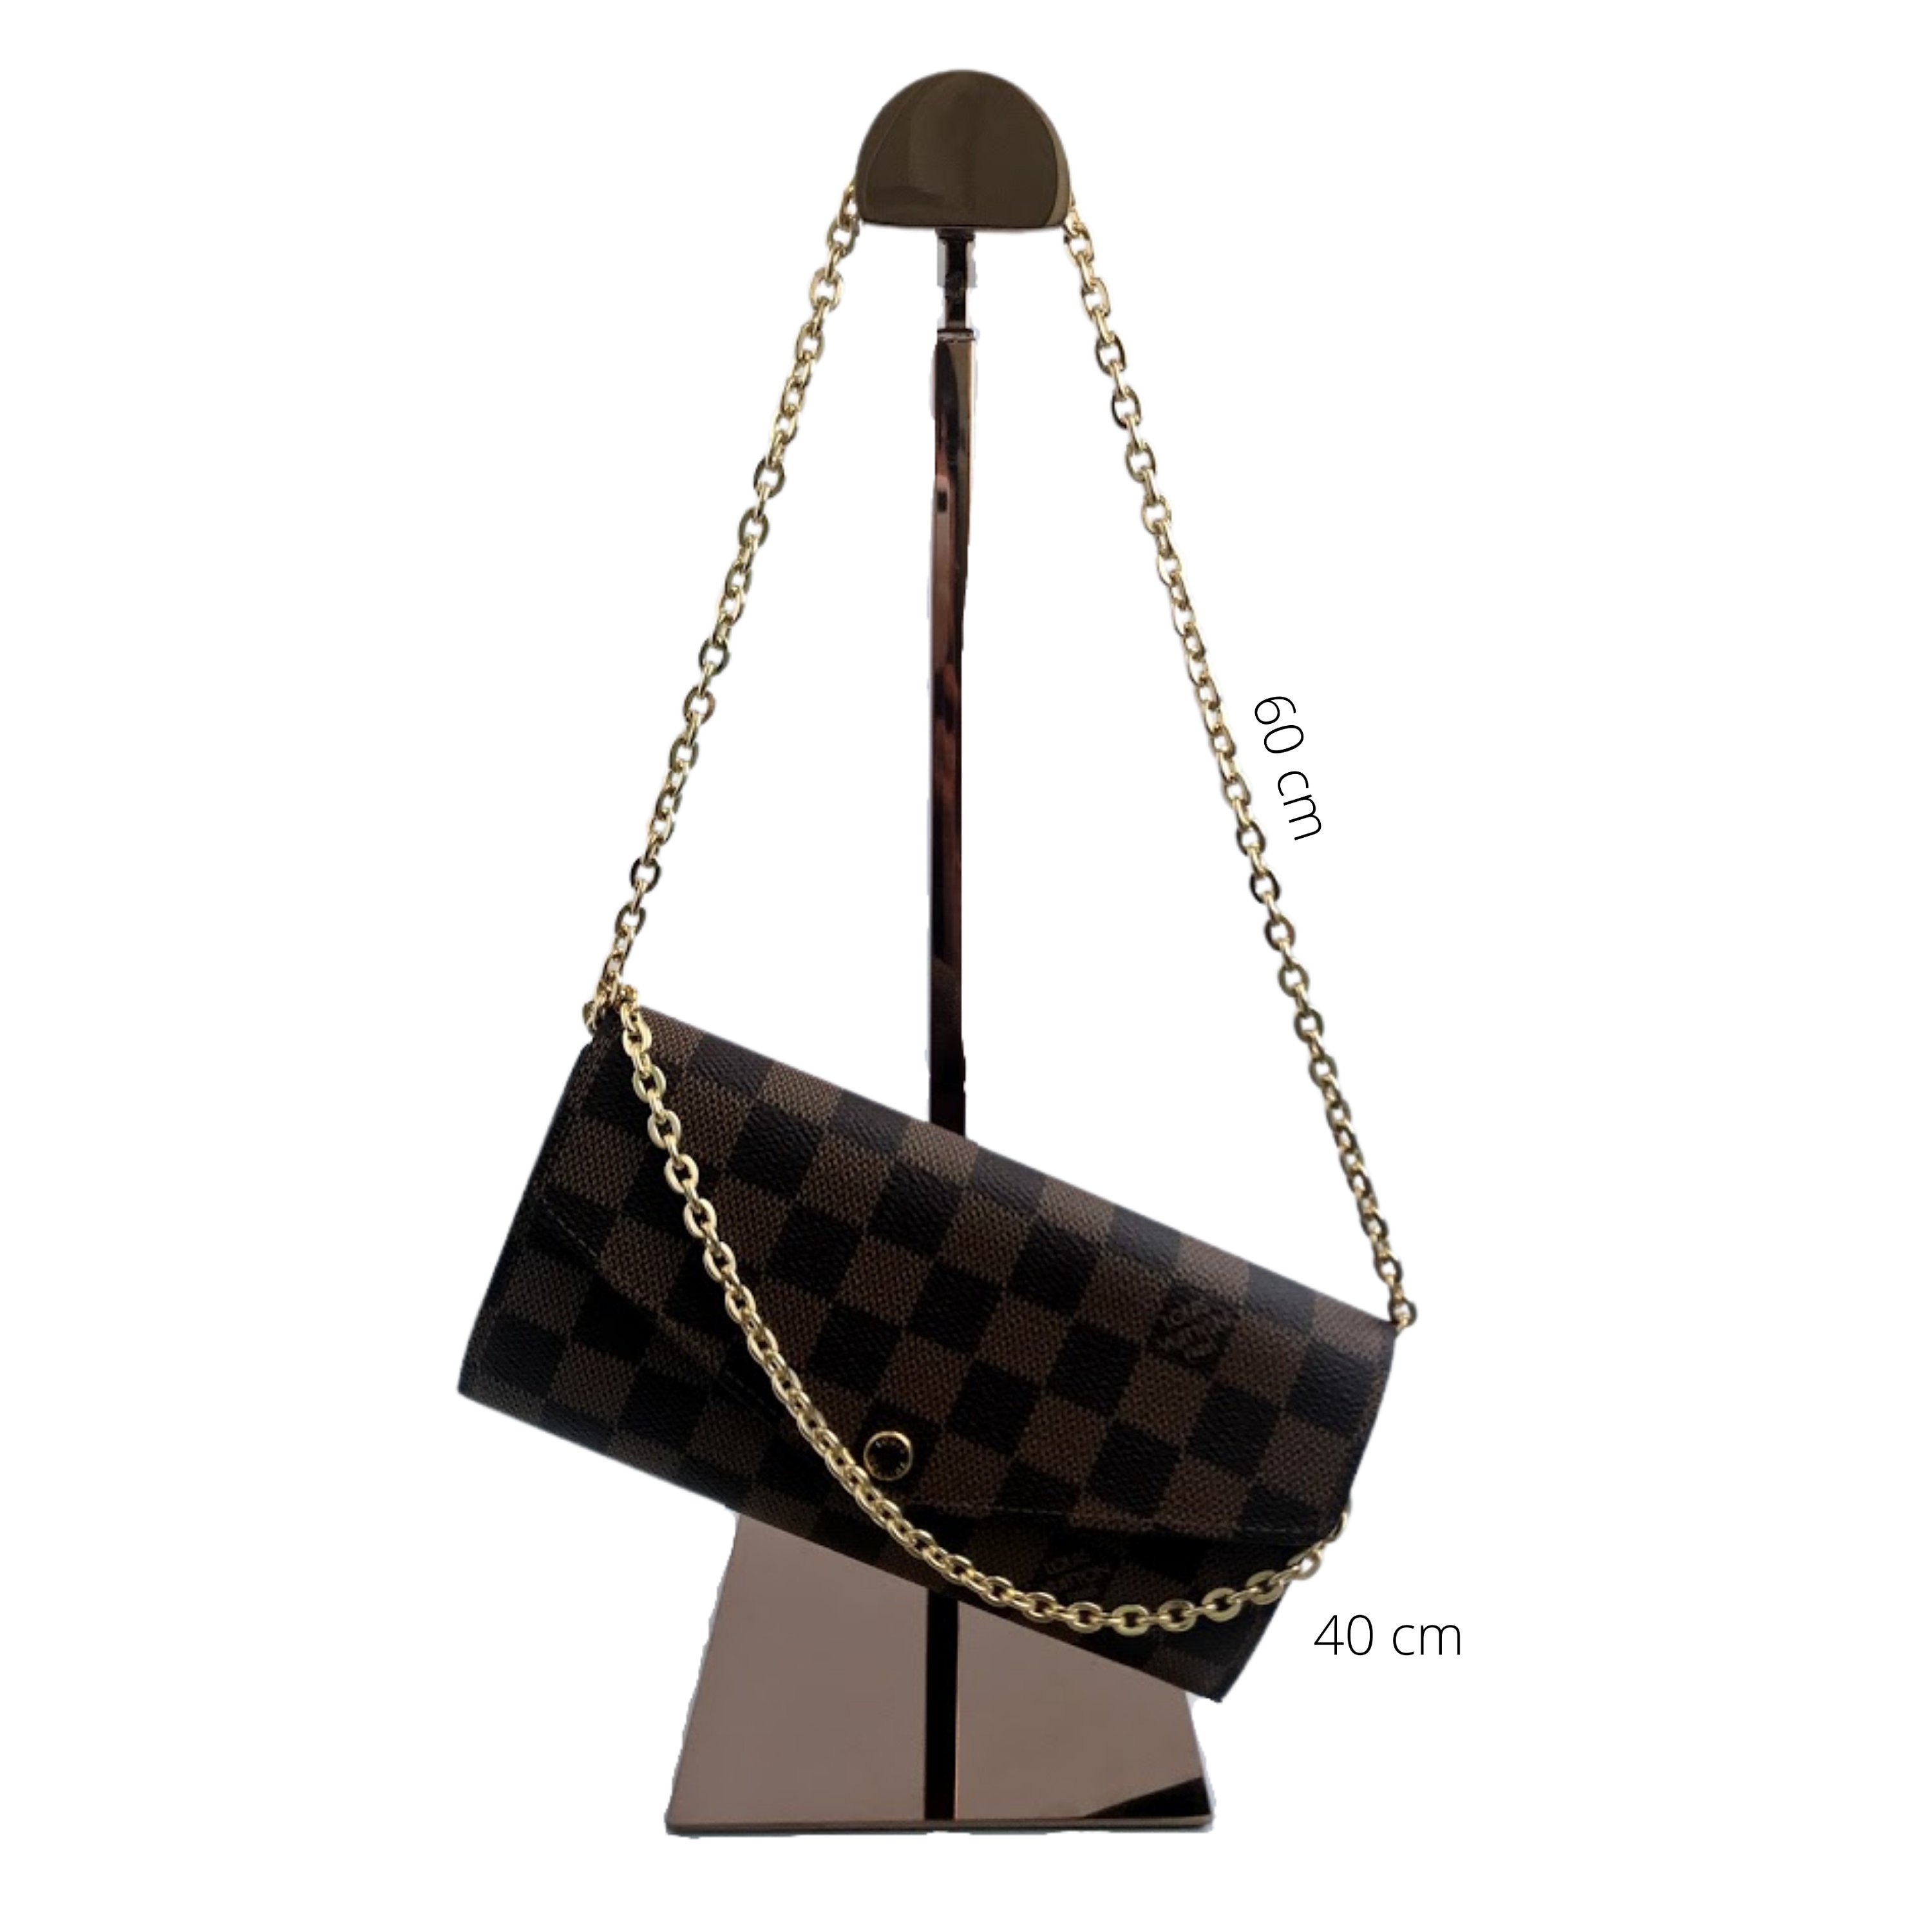 From HER Purse Insert Conversion Kit with Gold Chain for Sarah Emilie  Wallet to Crossbody (BLACK)